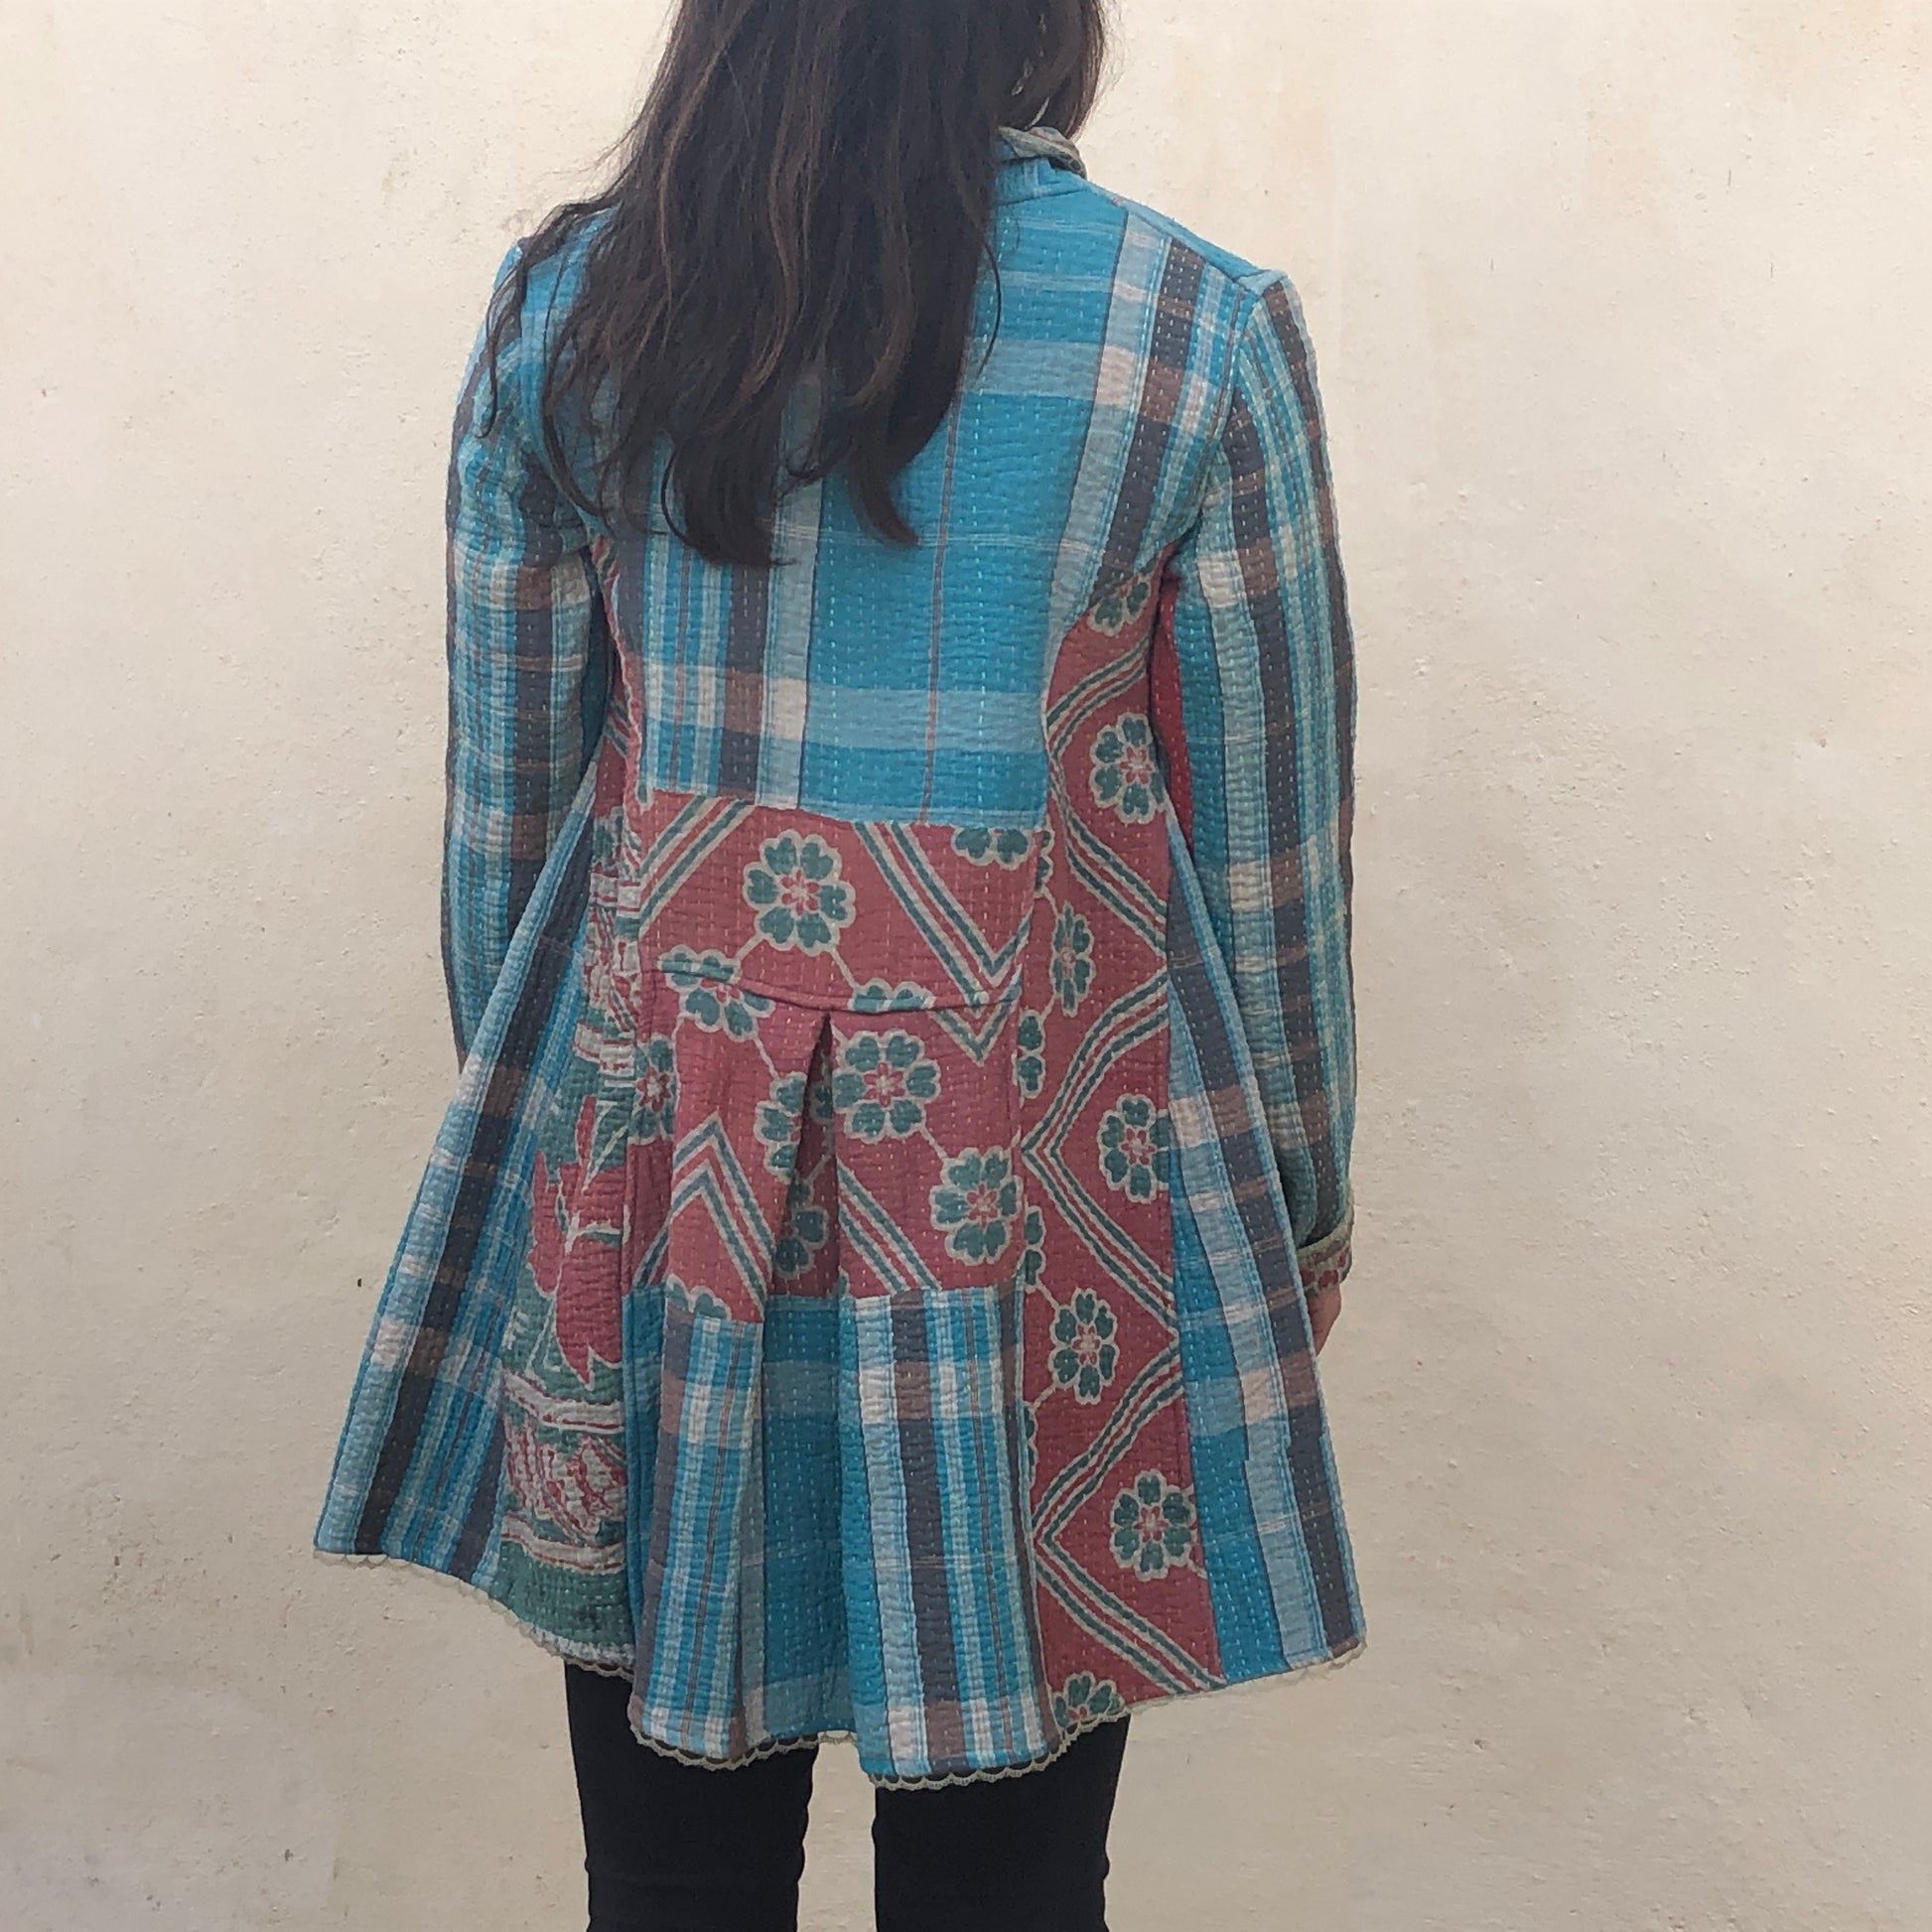 Blue, Grey and Pink Kantha Coat From Back View